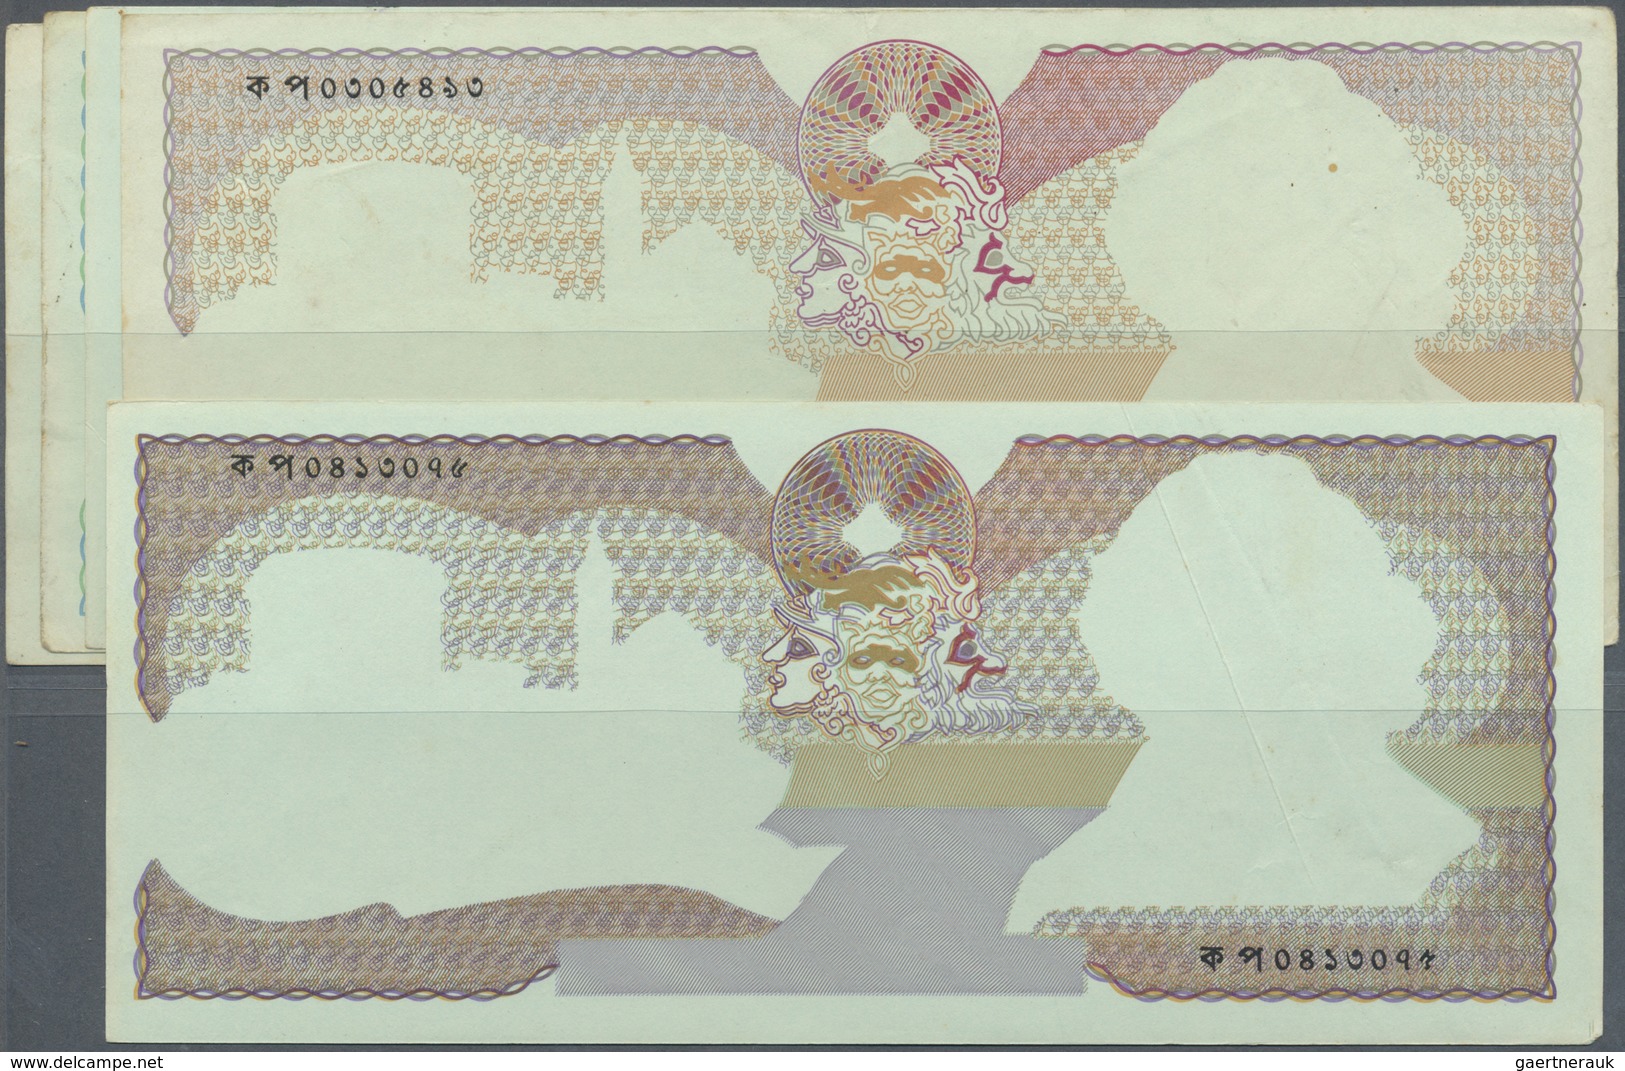 Testbanknoten: Set Of 5 Different Colored Test Notes Printed By DE LA RUE GIORI On Unwatermarked Gre - Specimen